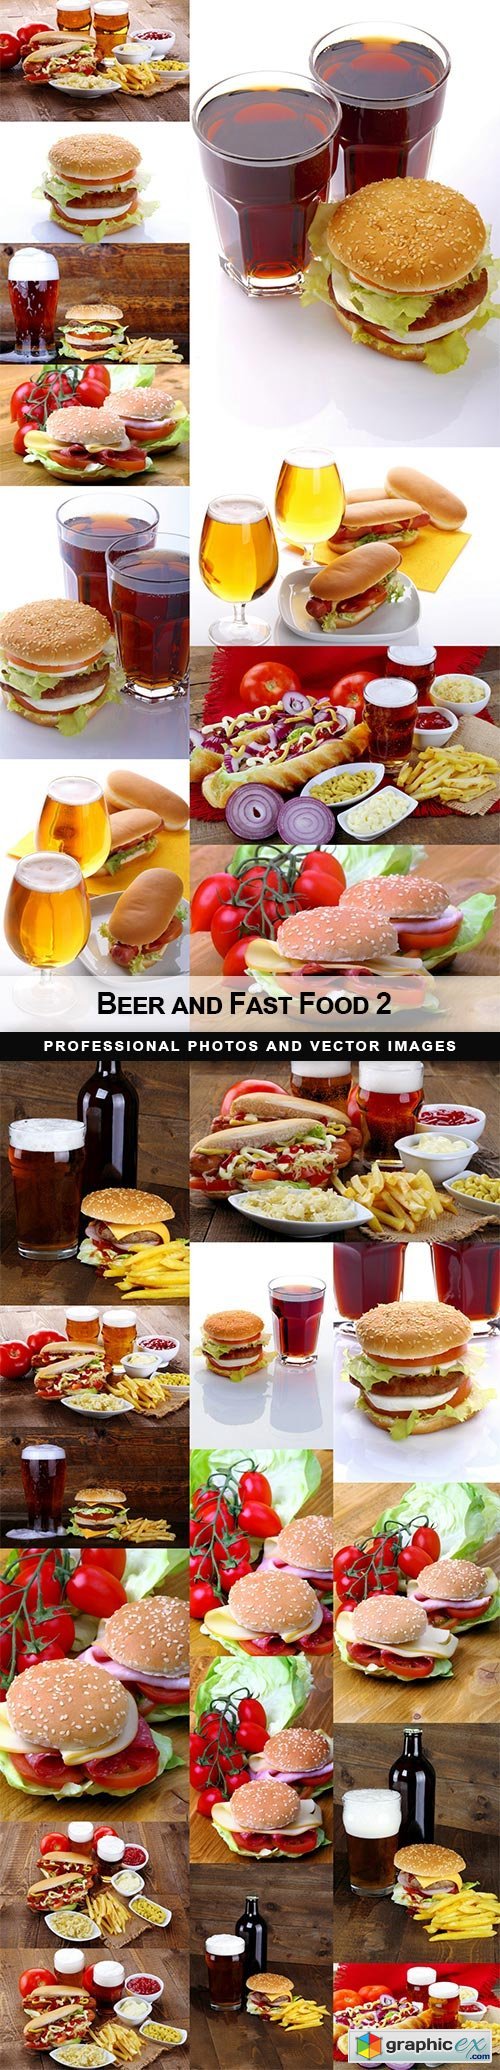  Beer and Fast Food 2